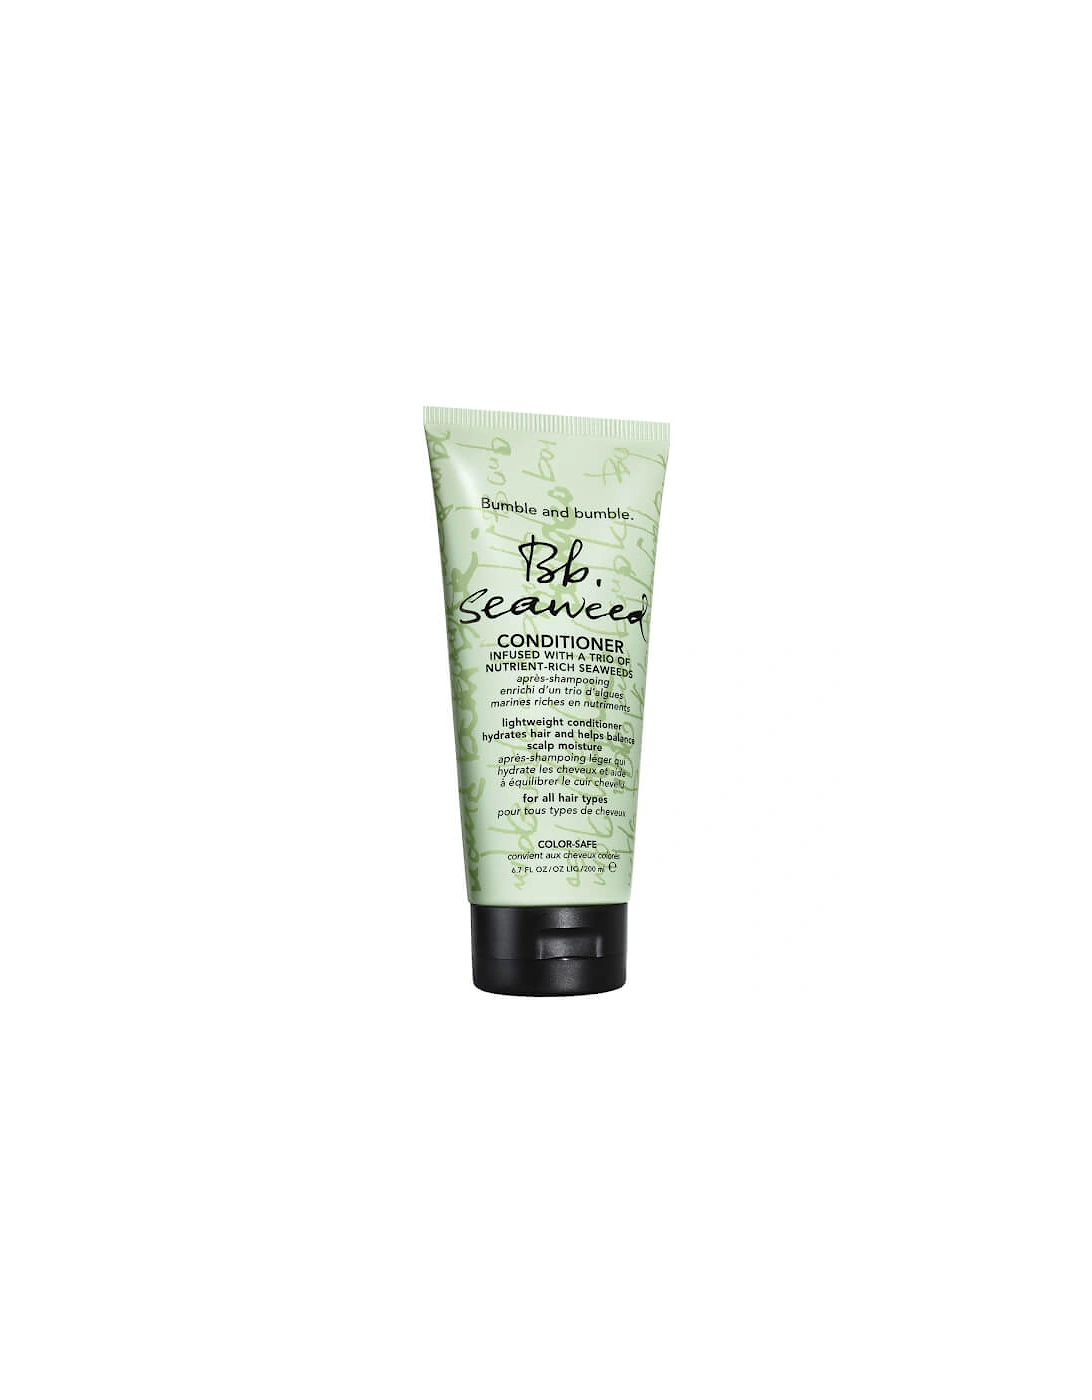 Bumble and bumble Seaweed Conditioner 200ml, 2 of 1